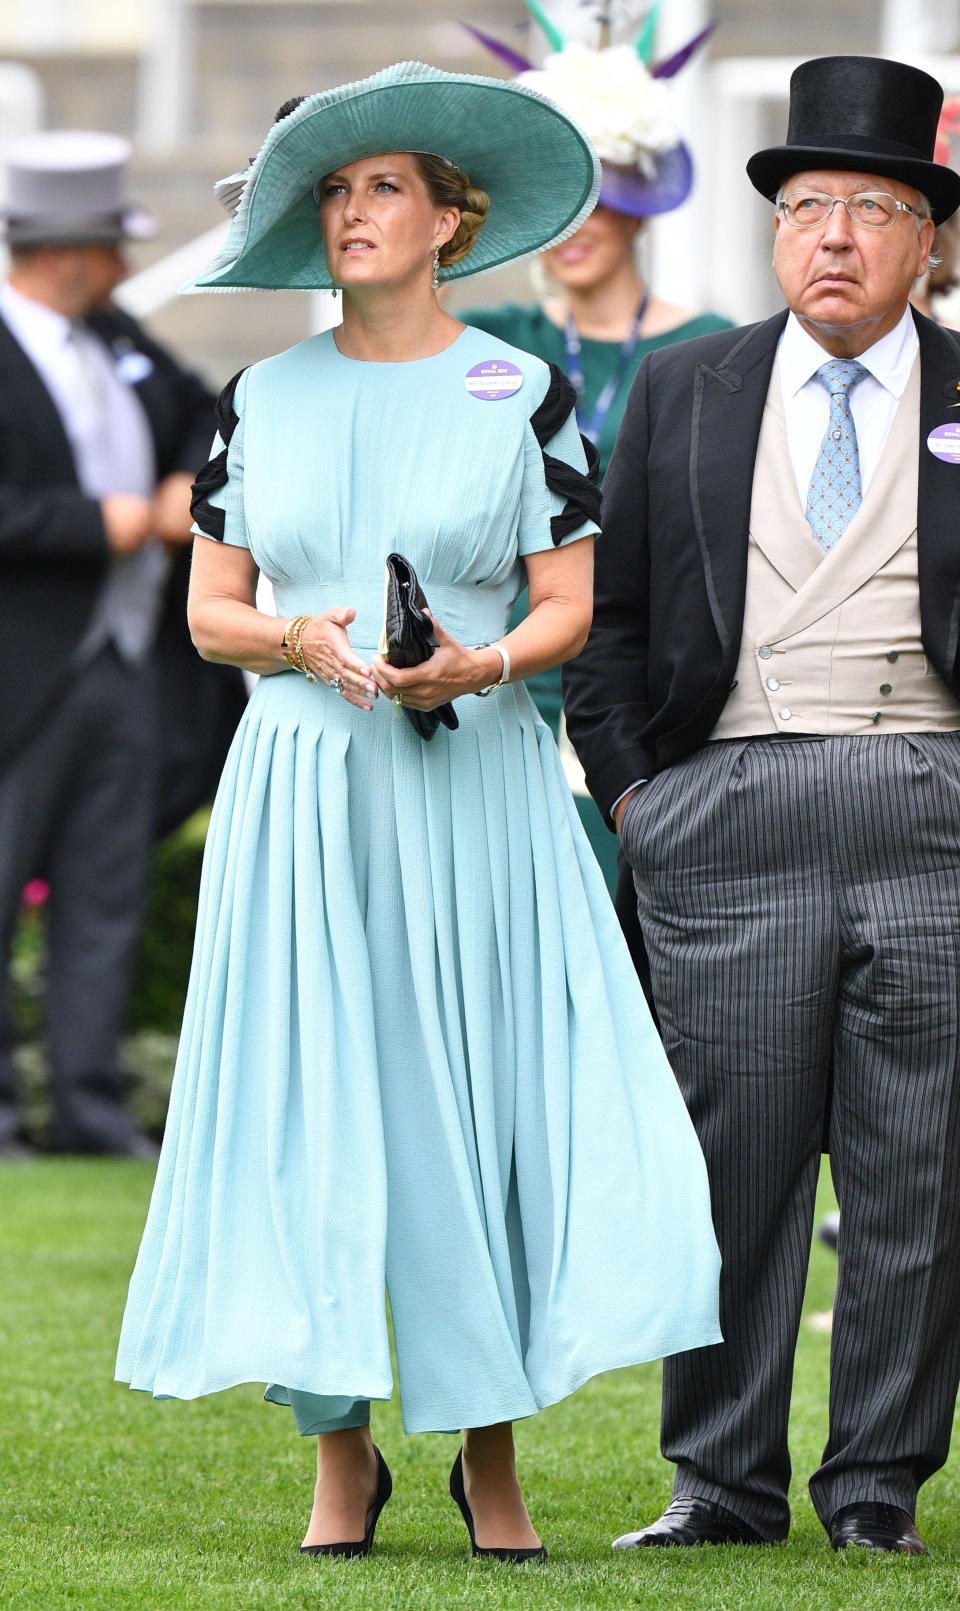 Sophie, Countess of Wessex on day 2 of Royal Ascot 2018